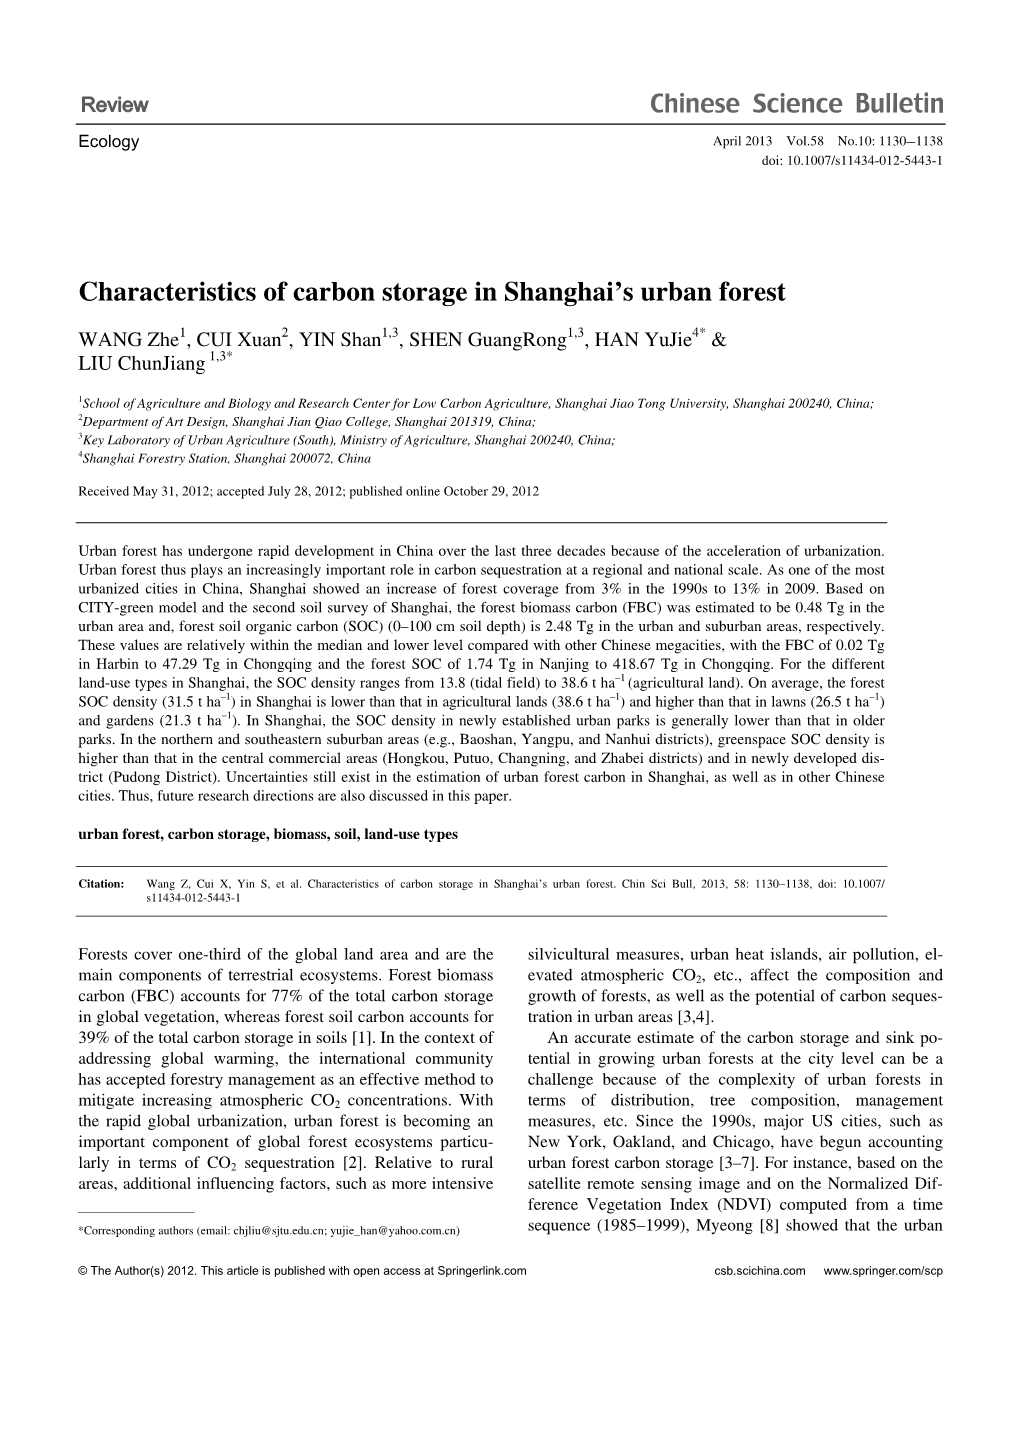 Characteristics of Carbon Storage in Shanghai's Urban Forest